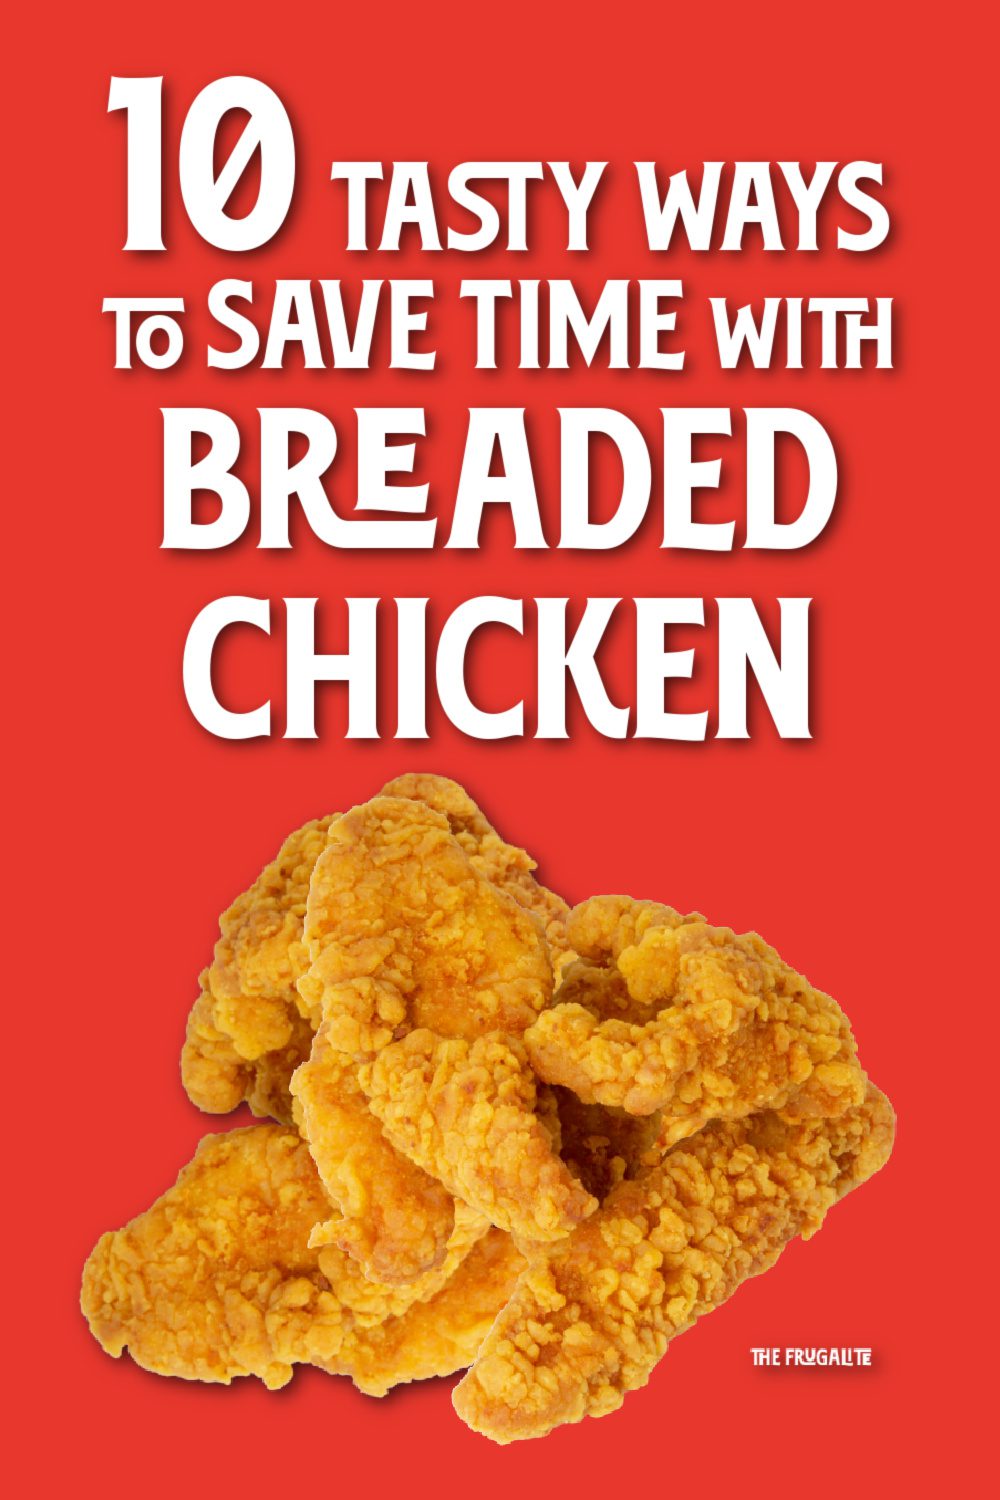 10 Tasty Ways to Save Time with Breaded Chicken